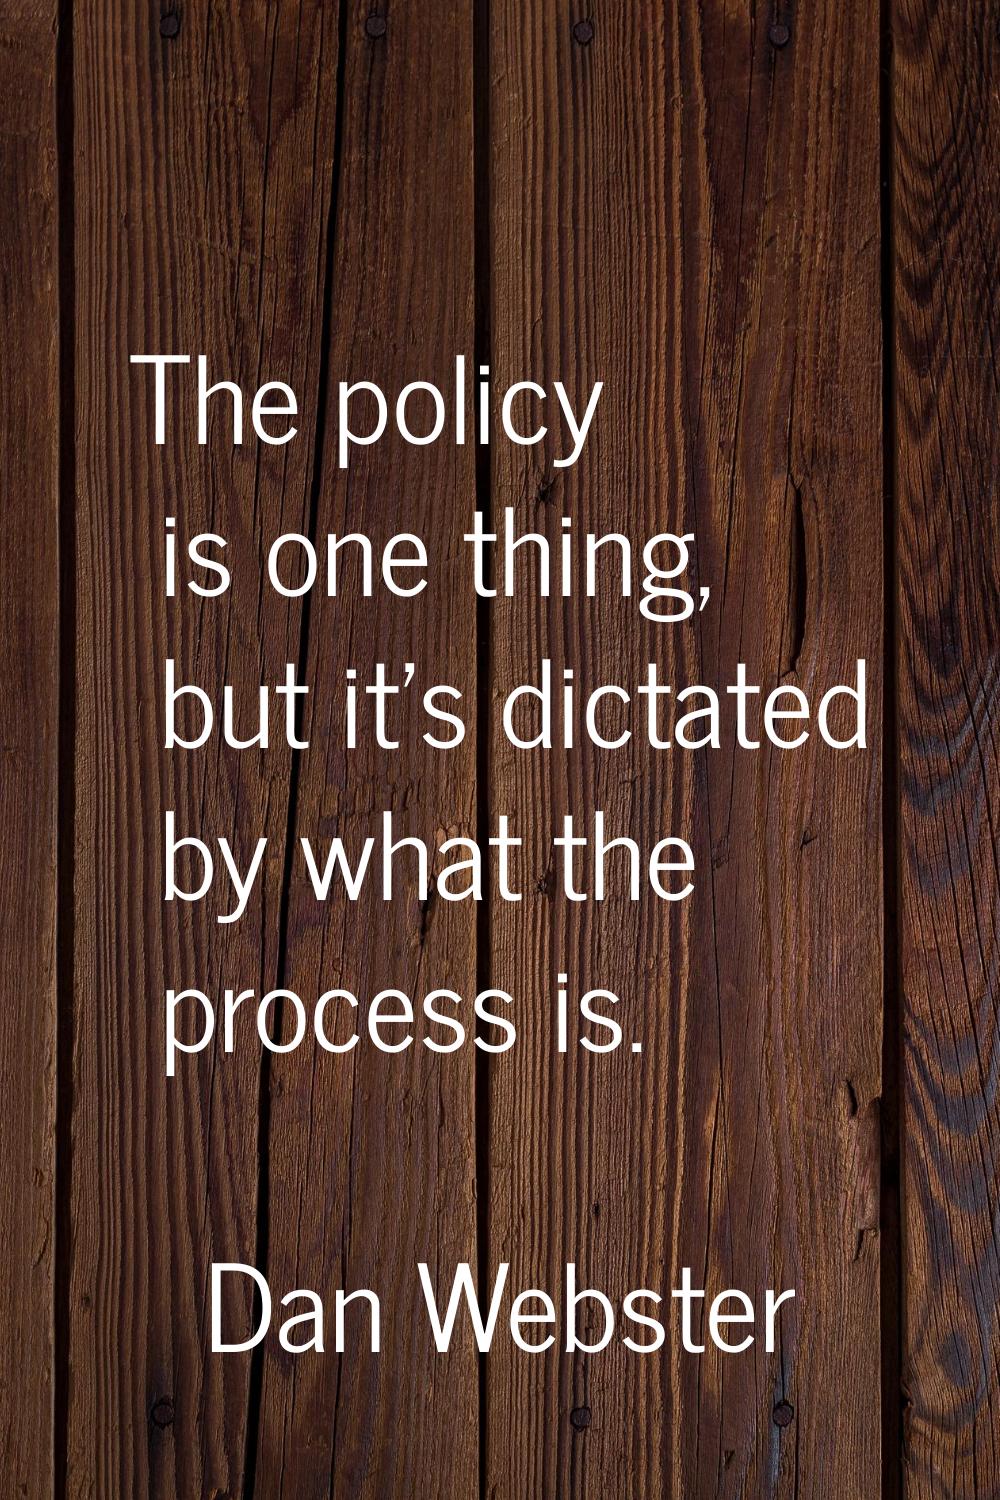 The policy is one thing, but it's dictated by what the process is.